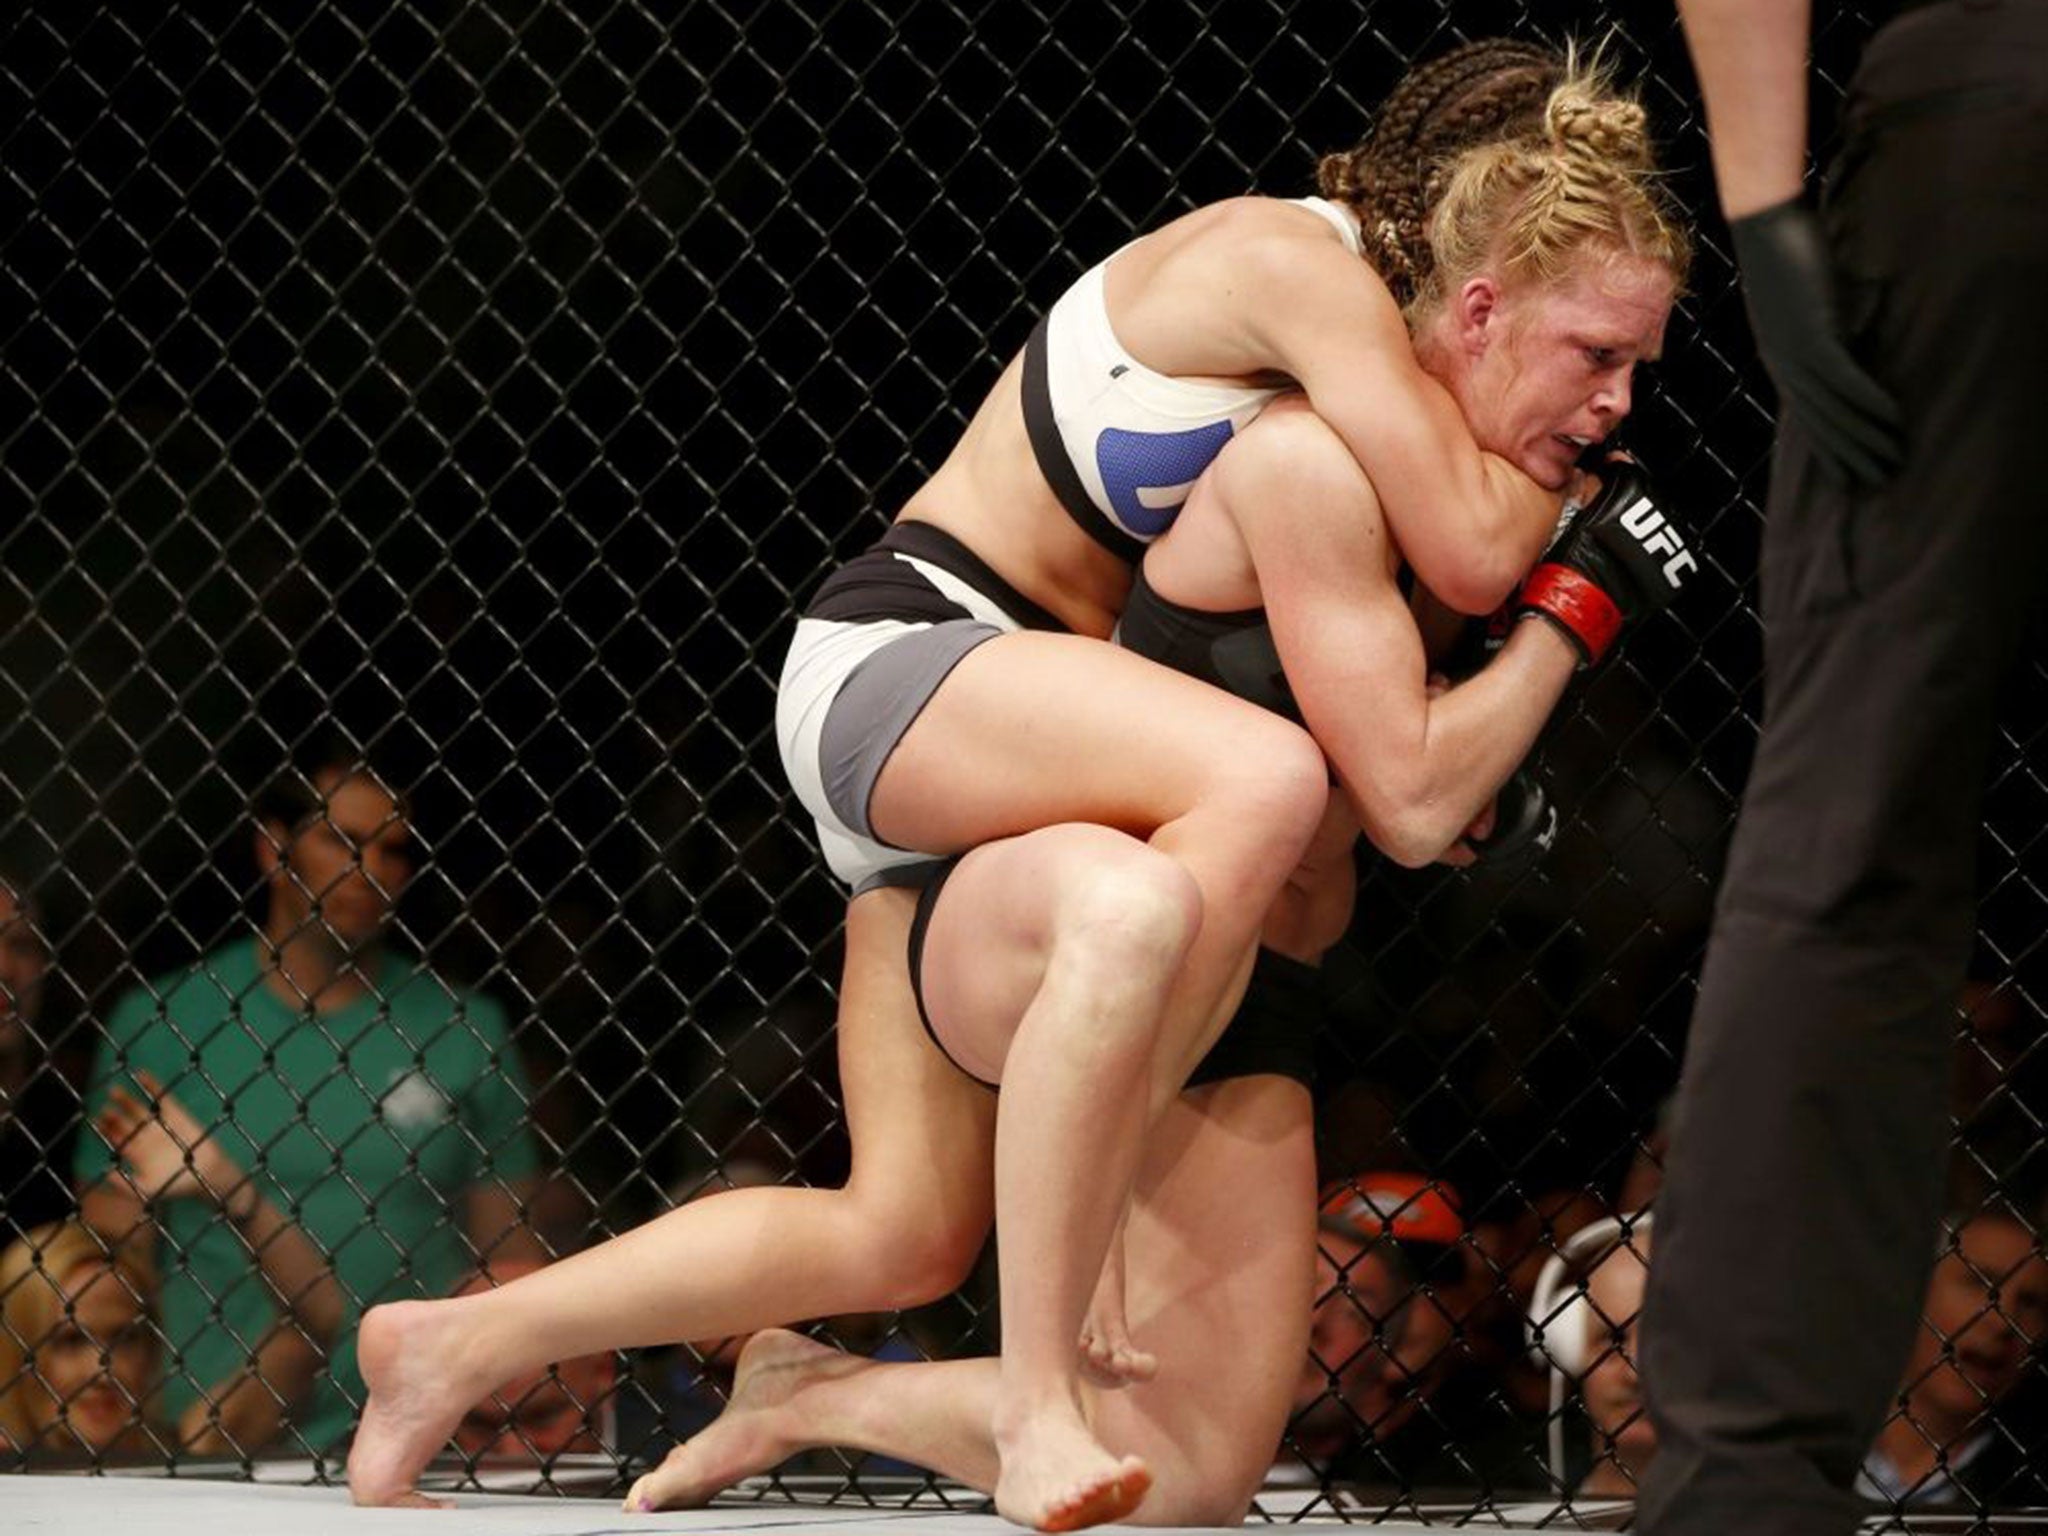 &#13;
Tate won the title after choking Holm unconscious &#13;